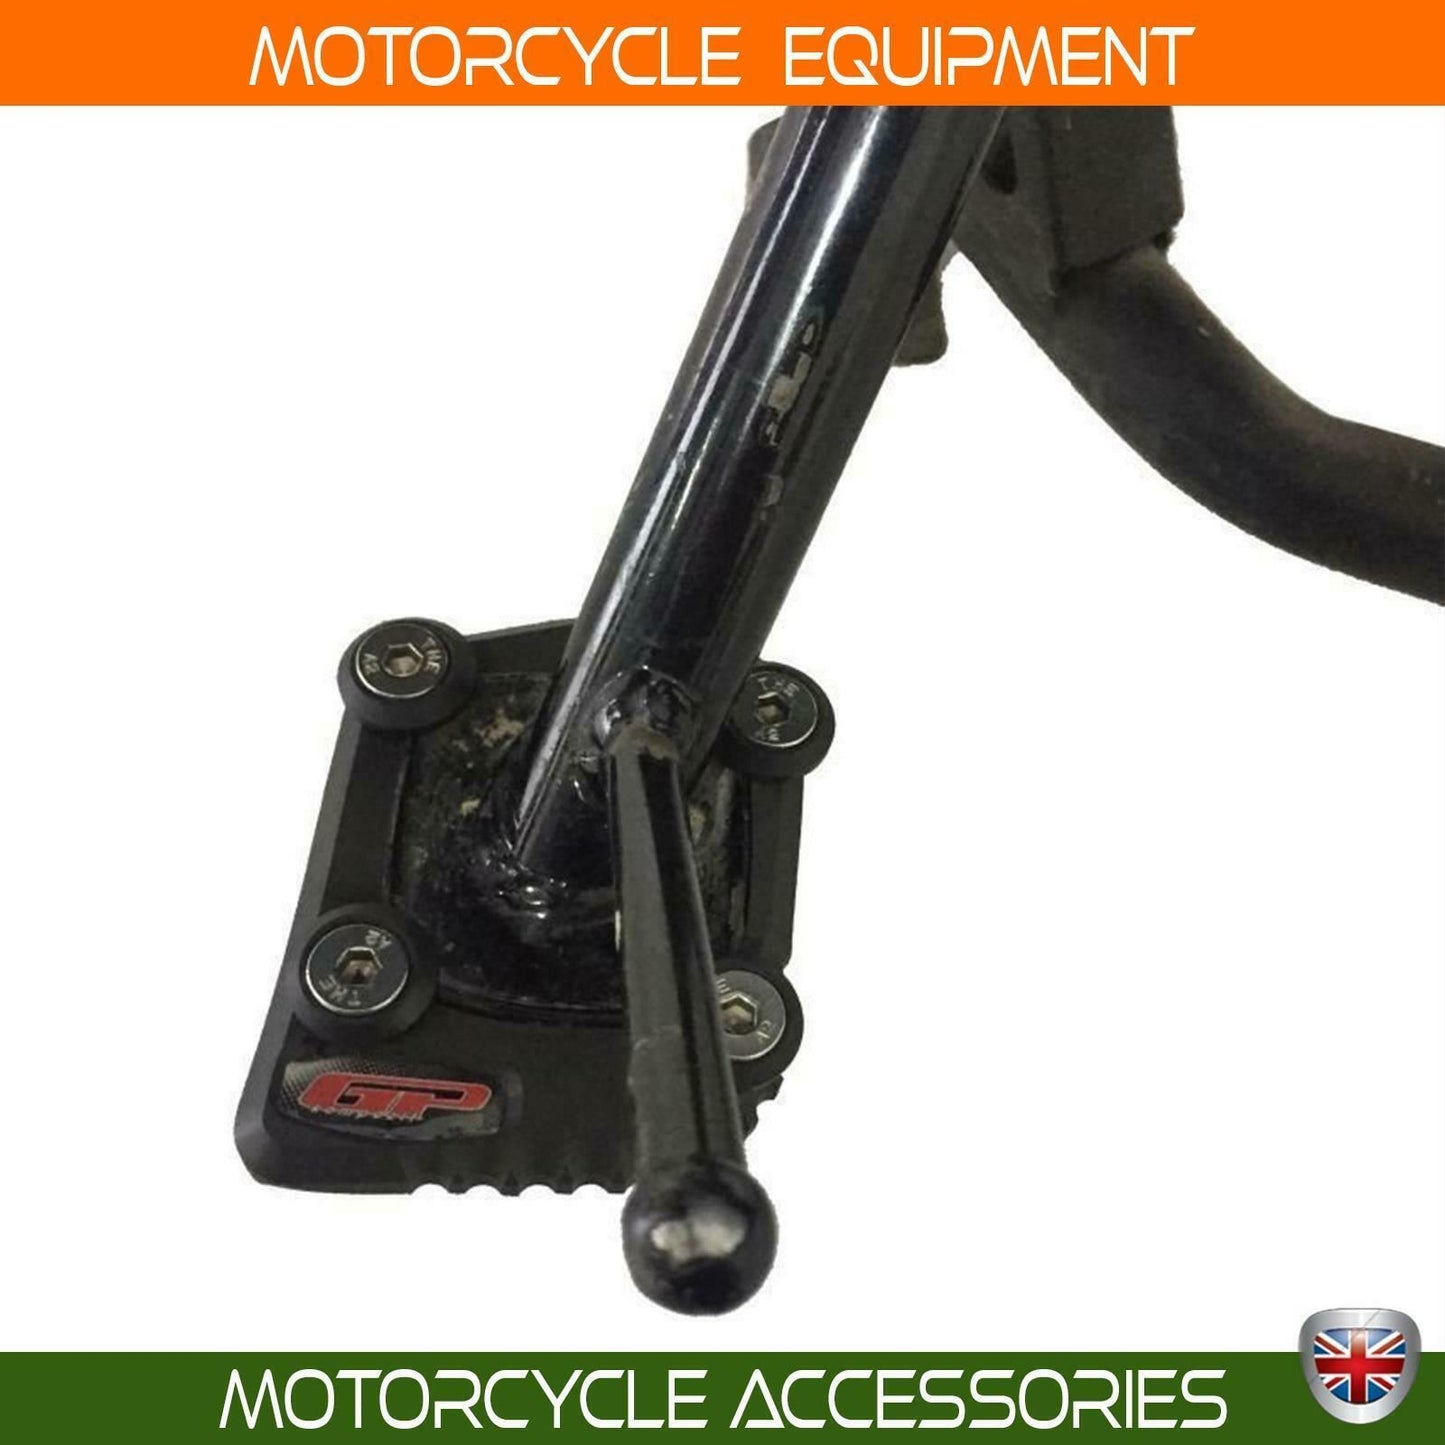 Honda NC 700/750X side stand enlarger extension